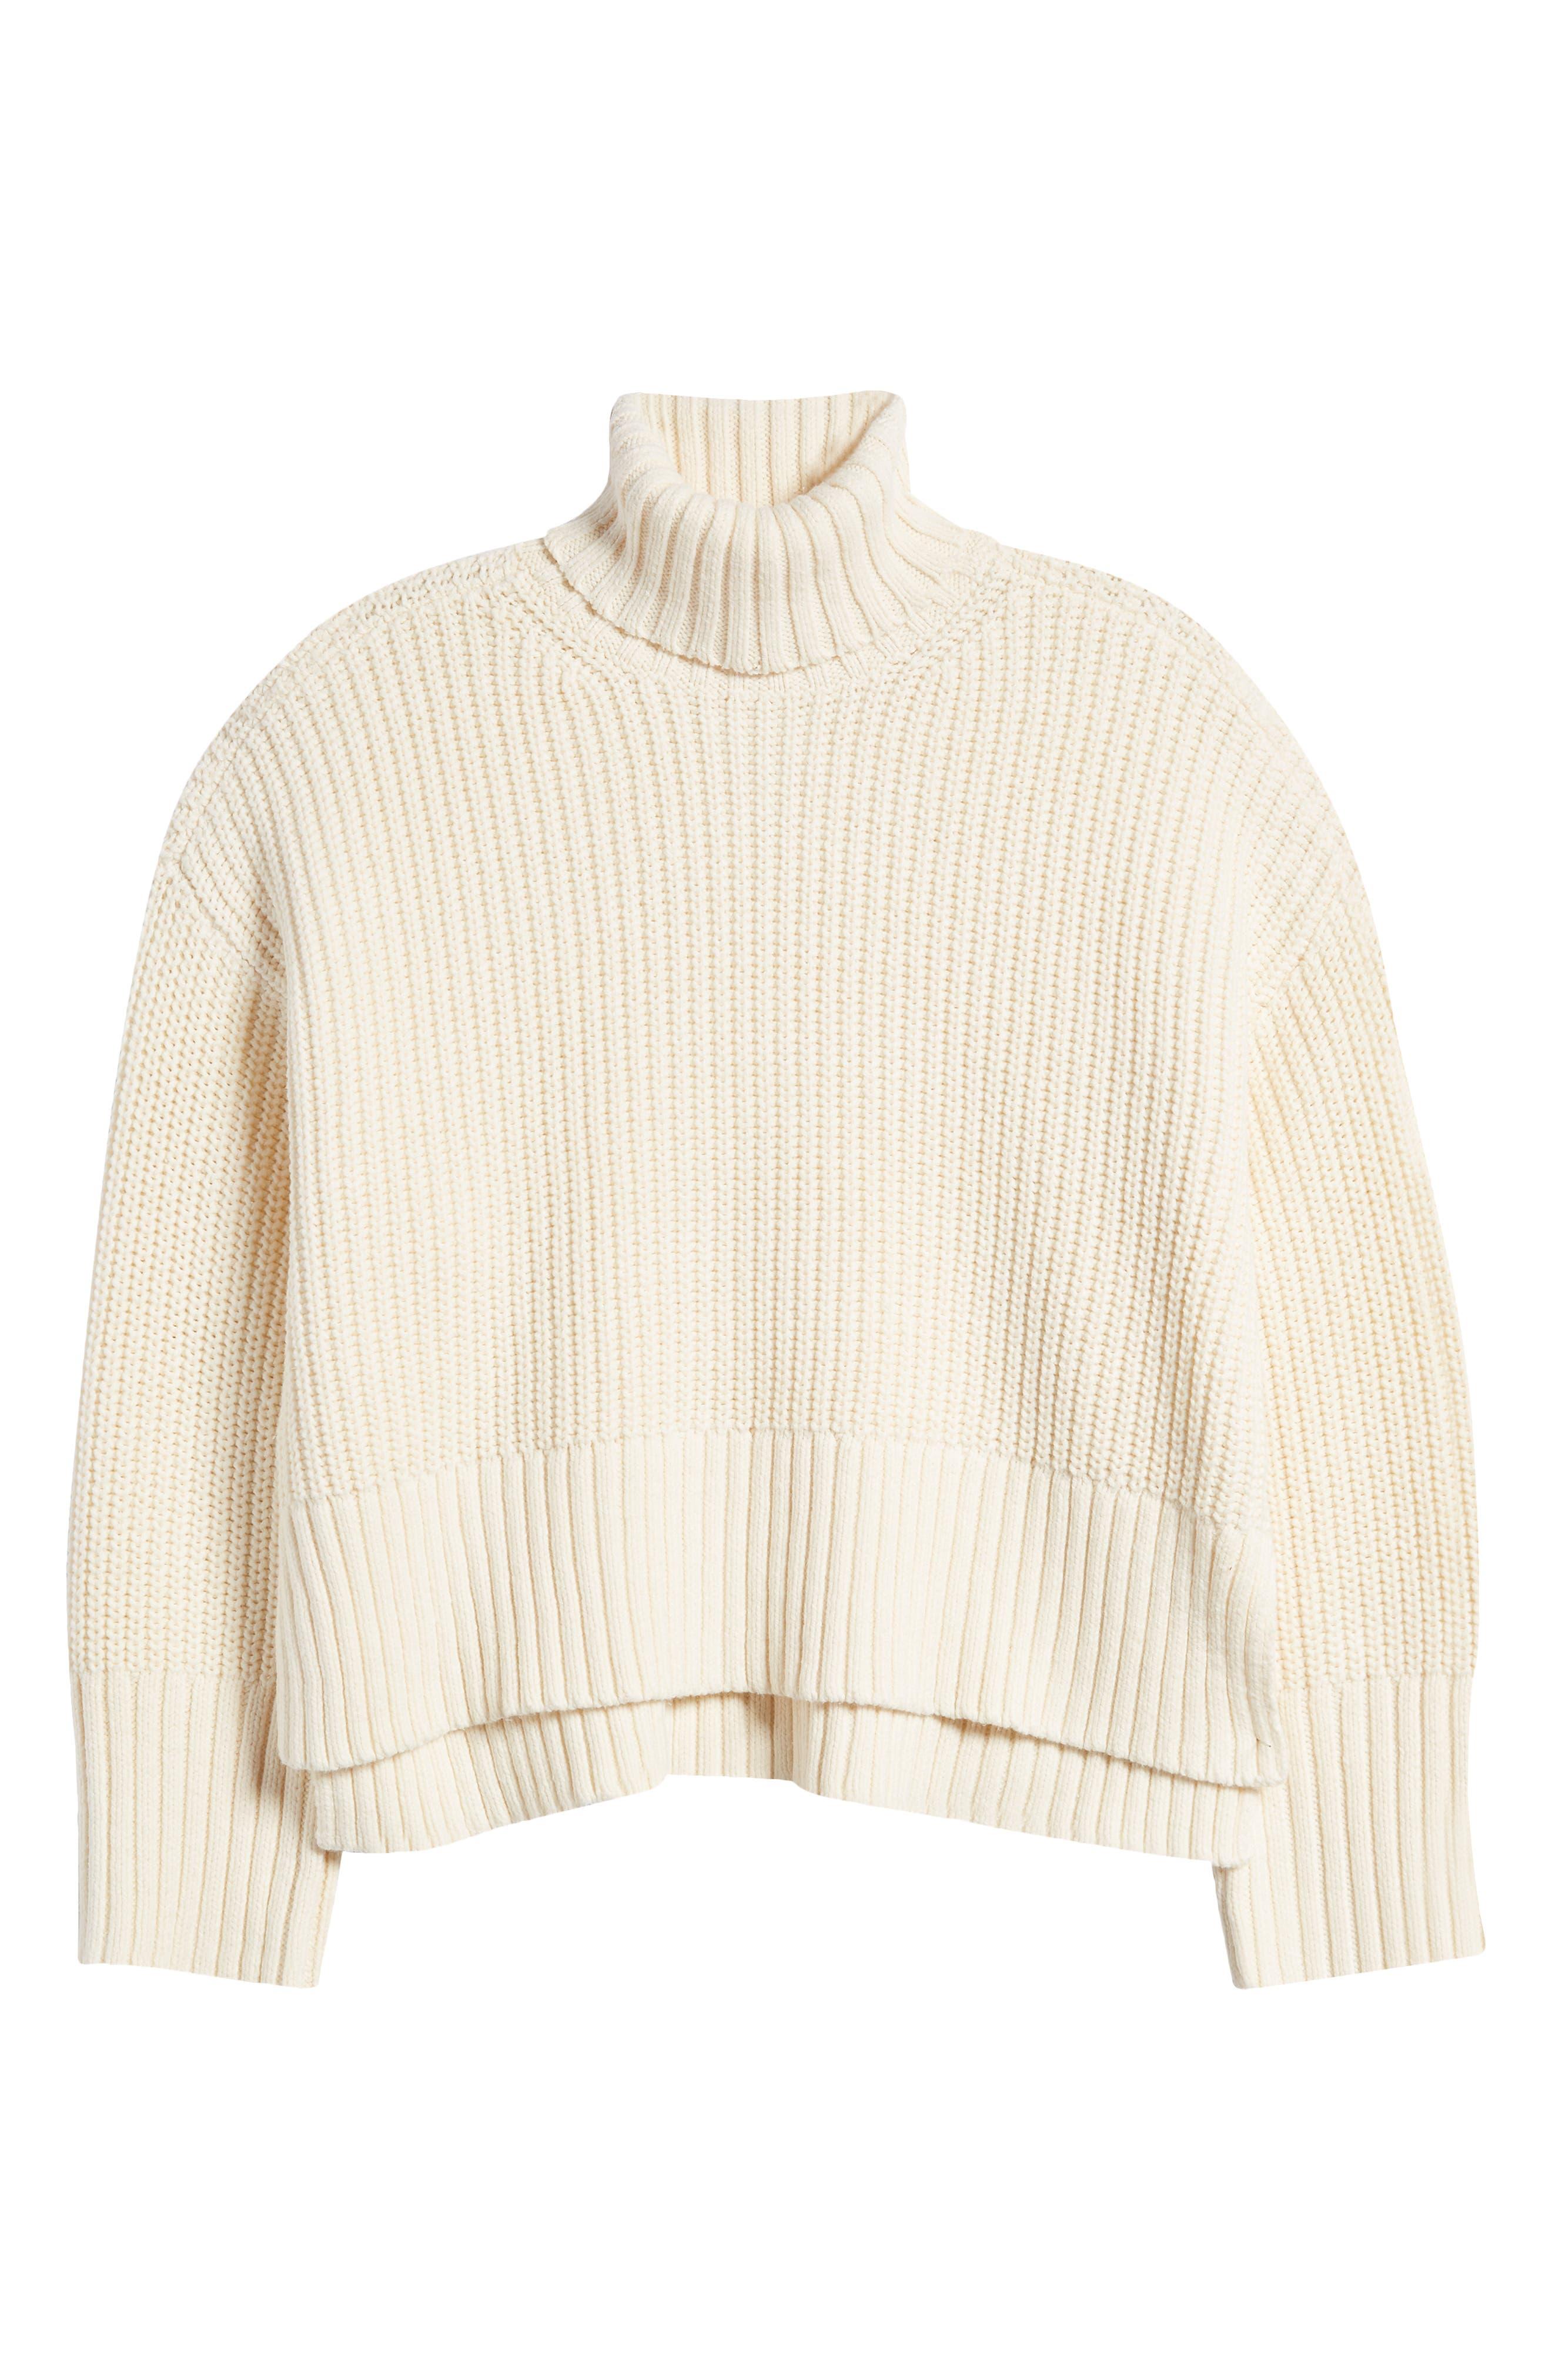 Madewell Wide Rib Turtleneck Sweater in Natural | Lyst